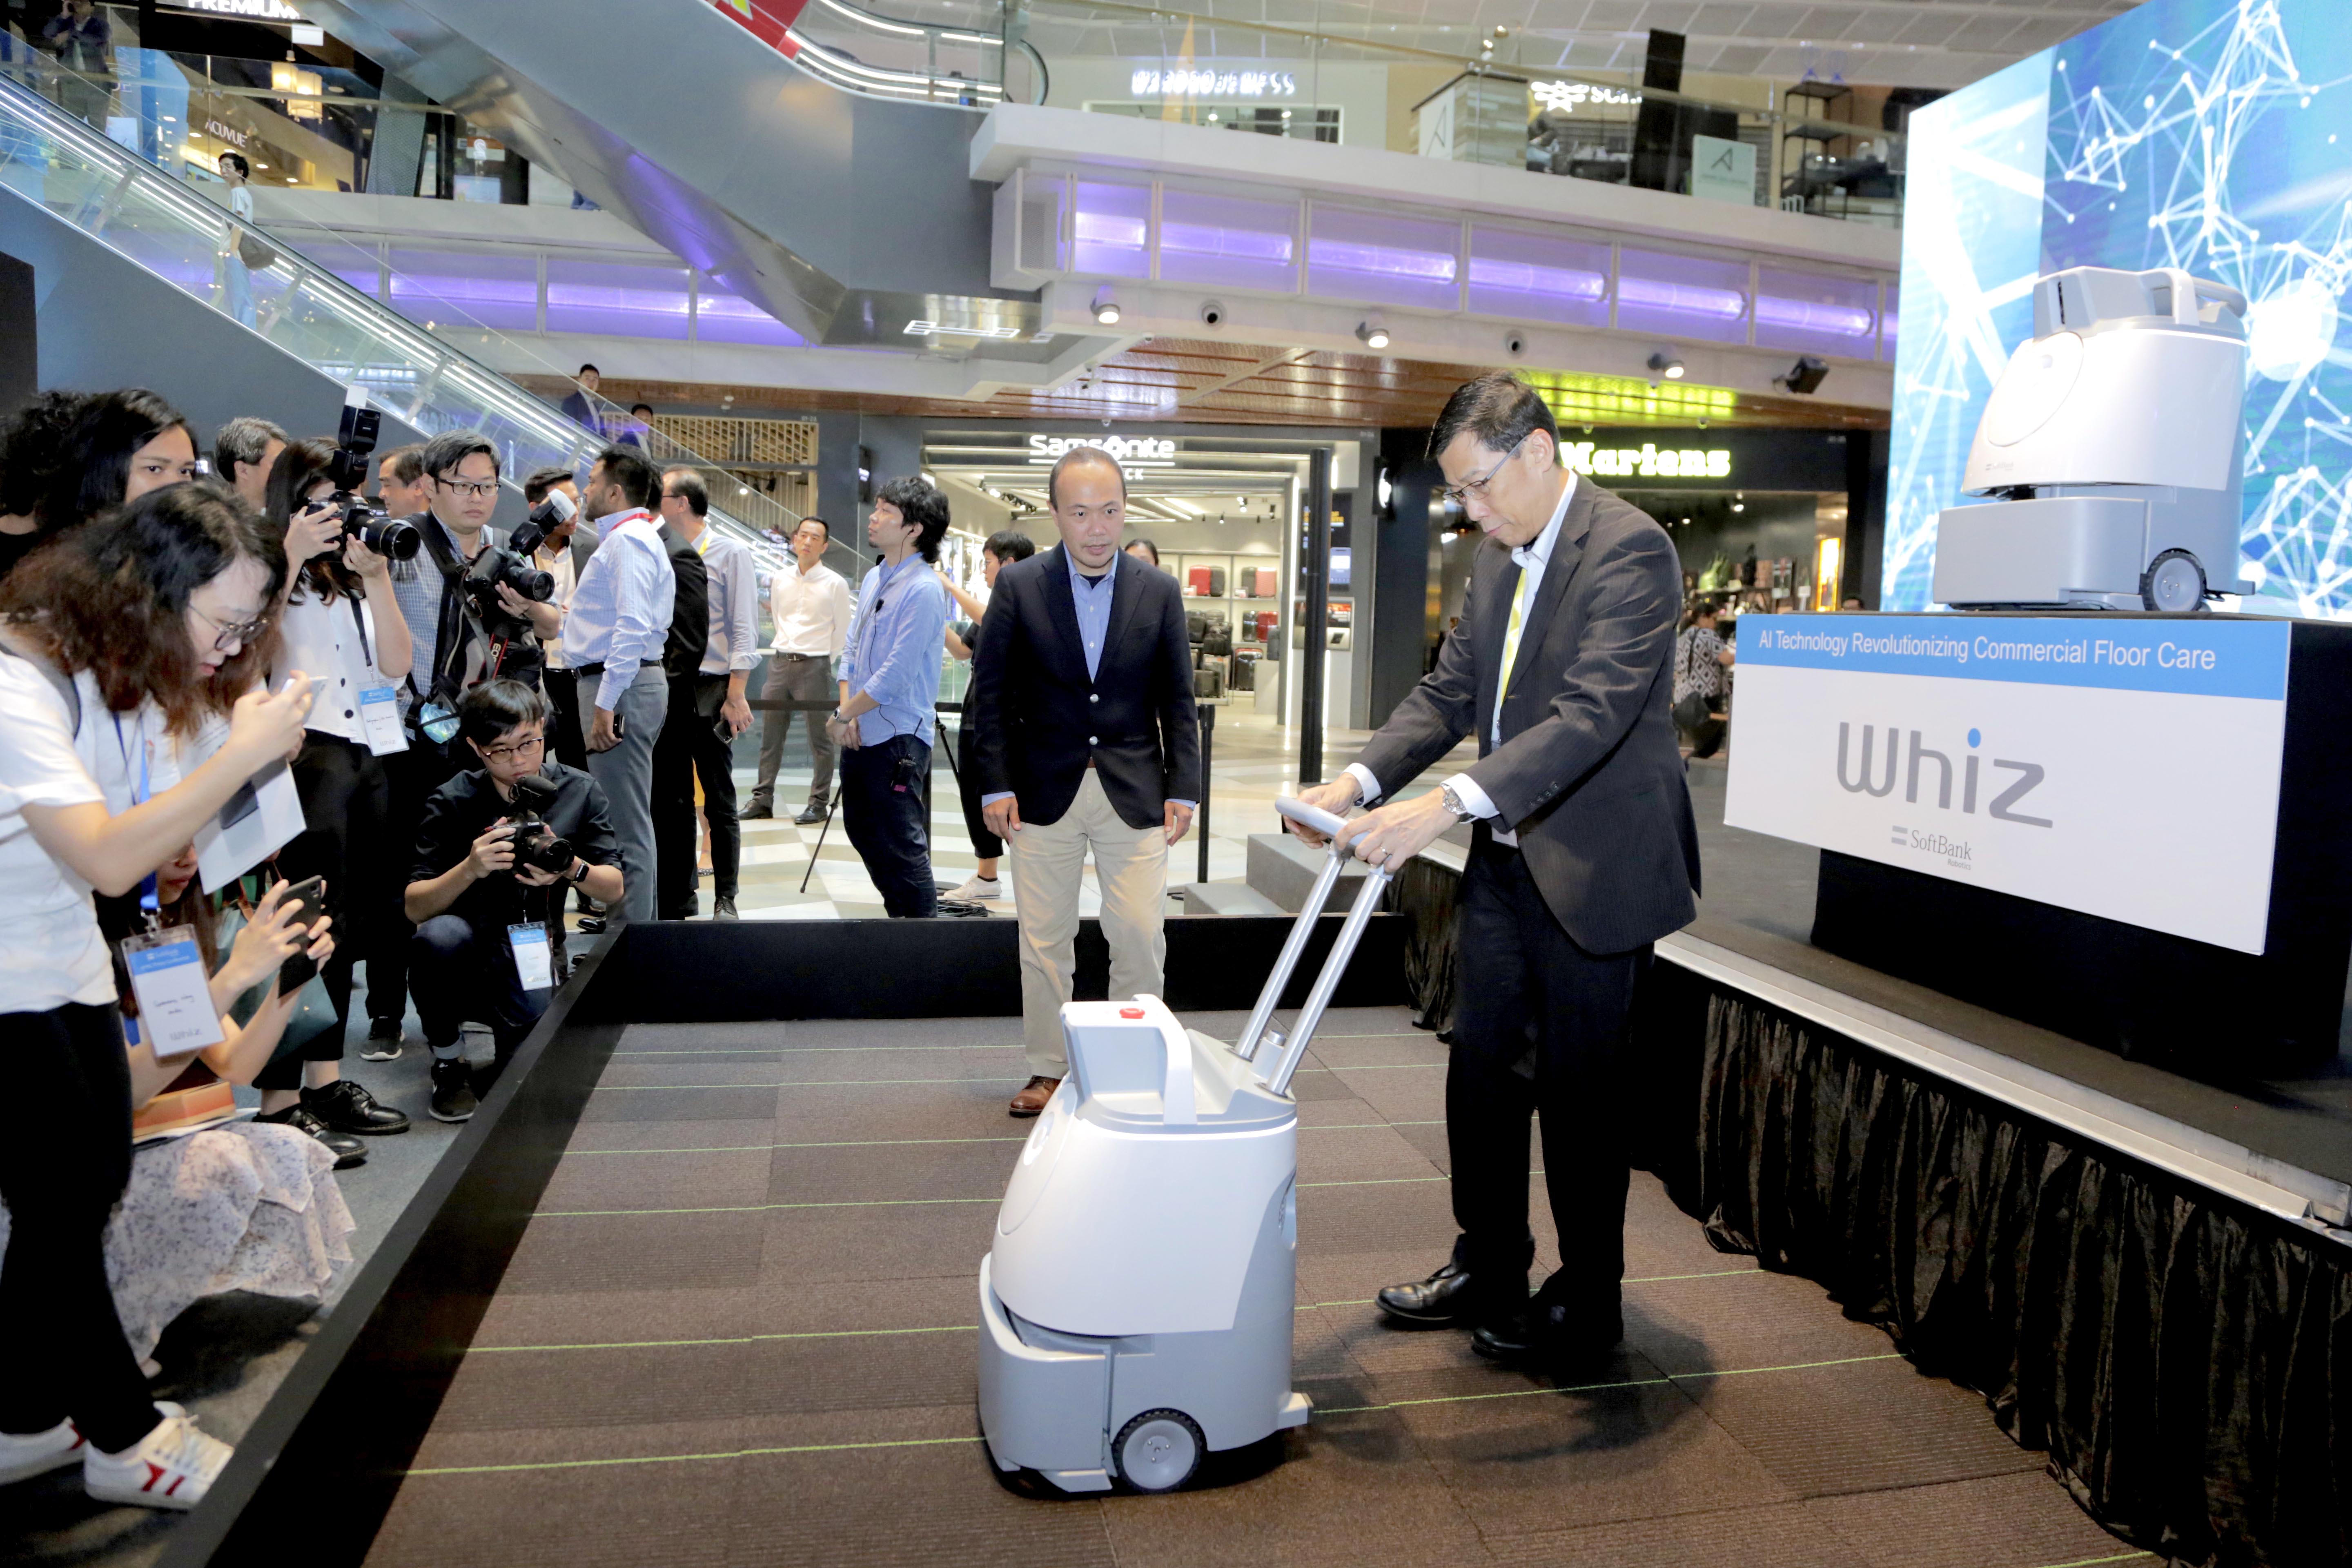 Whiz - an AI-enabled and semi-autonomous vacuum-cleaning robot arrives in Singapore - Alvinology